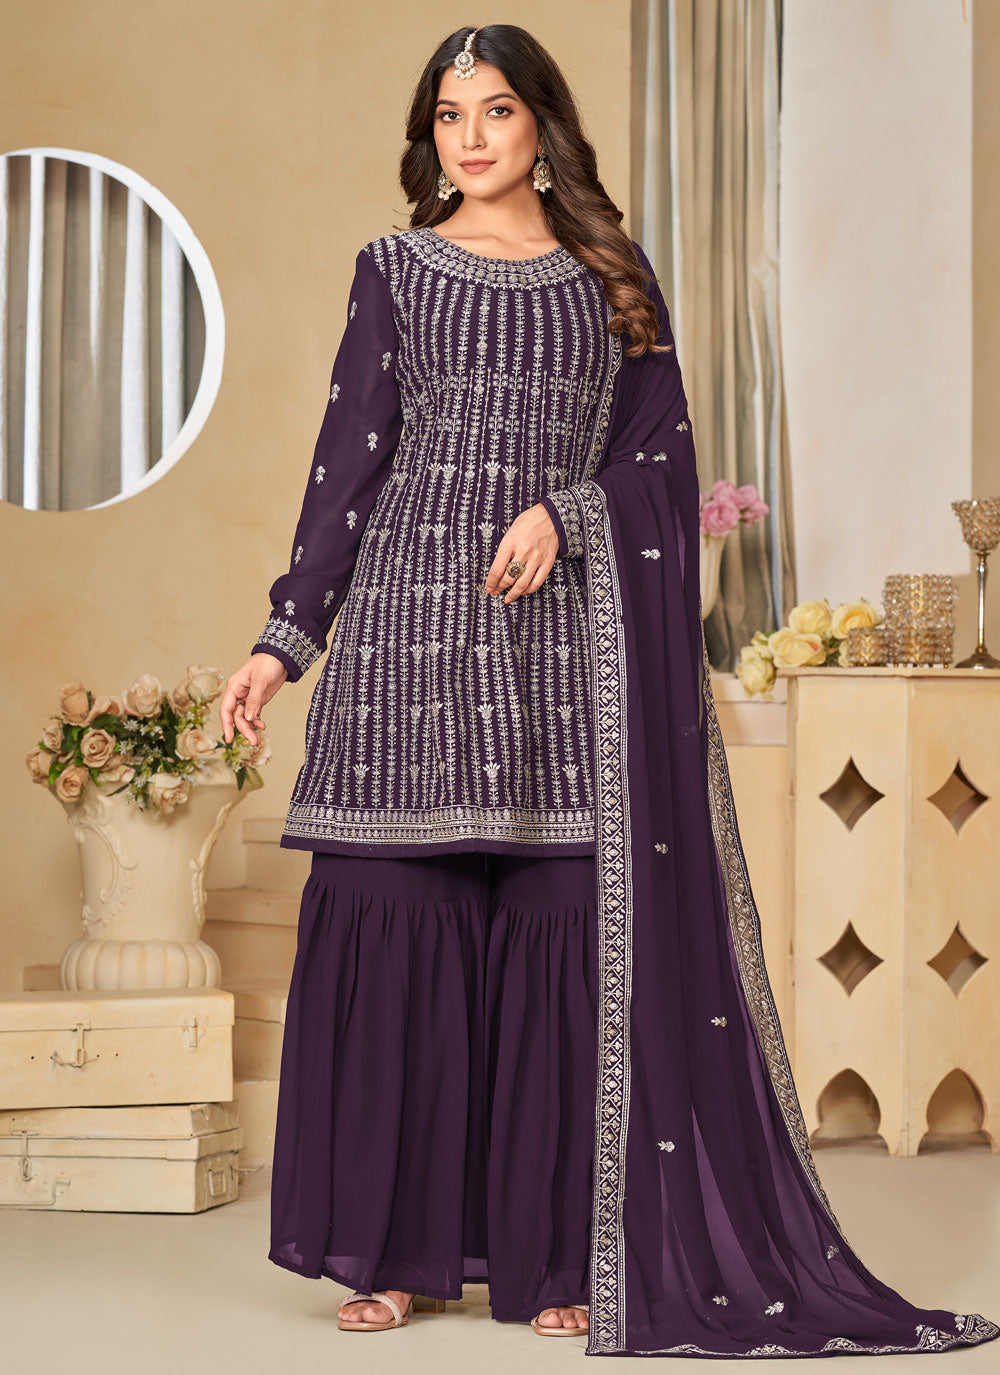 Purple Faux Georgette Embroidered Work Salwar Suit For Women